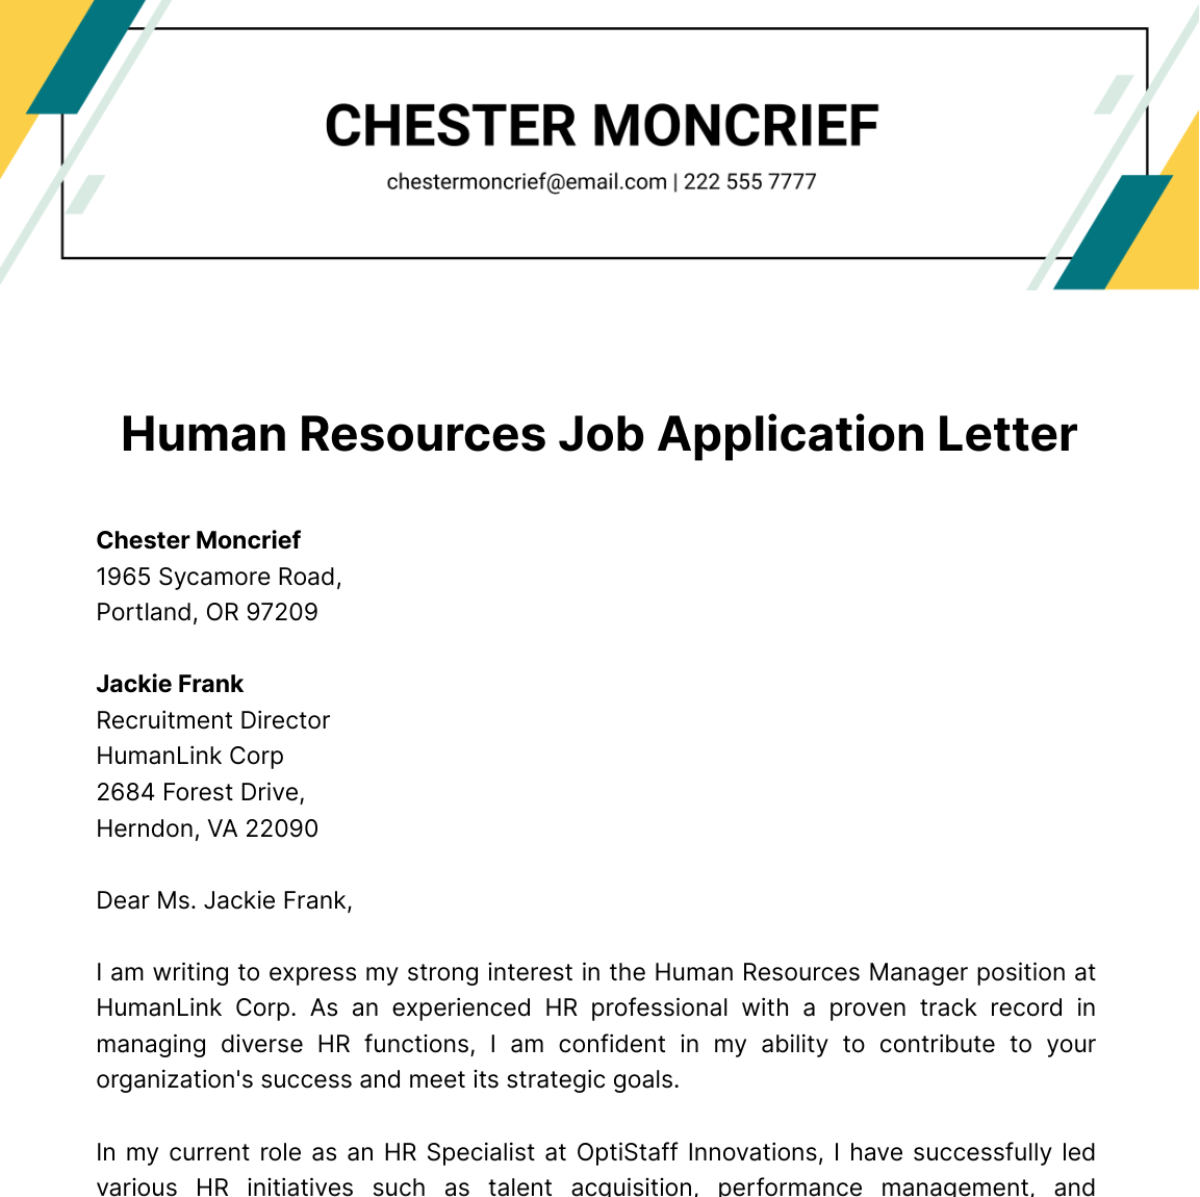 Human Resources Job Application Letter  Template